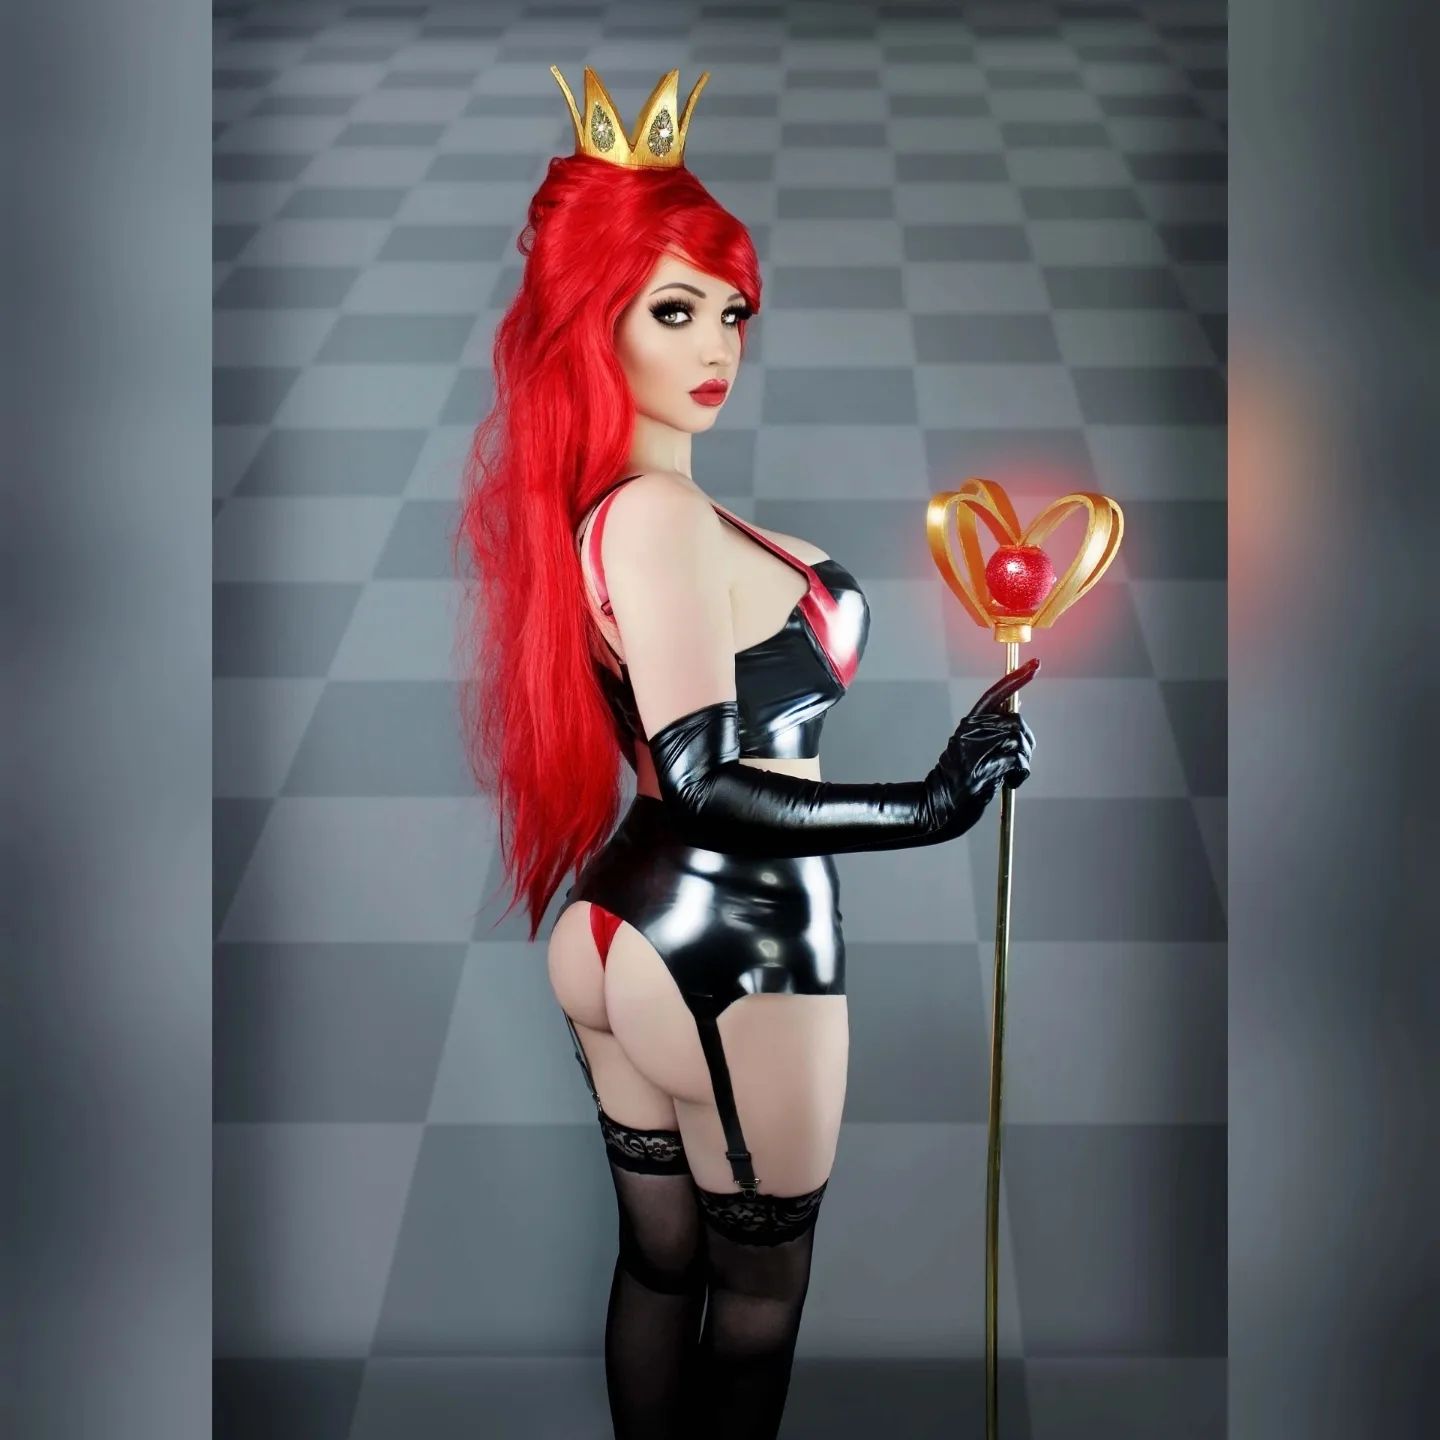 Like to capture my heart ❤️
Latex queen of hearts by catalystlatex
More latex coming this year, what do you want to see? I will make some suggestions happen! 💖